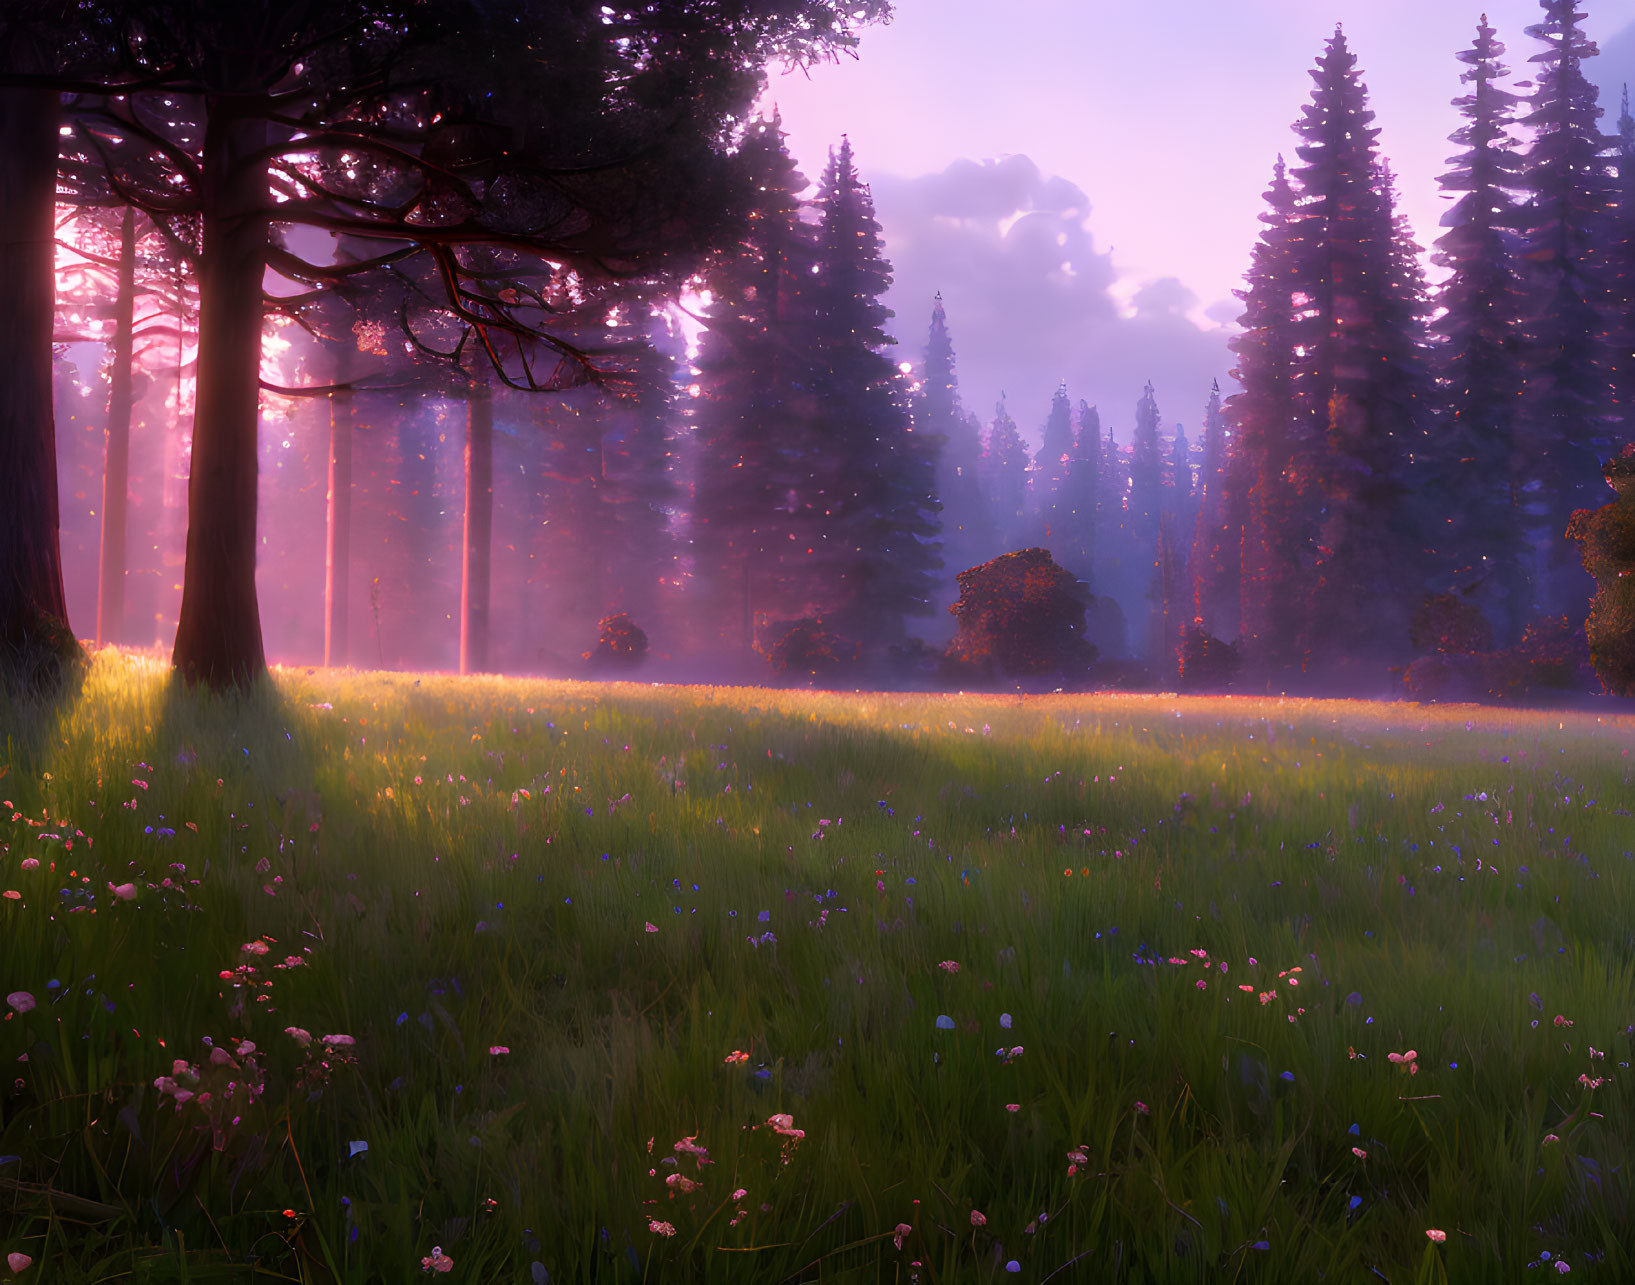 Tranquil forest glade at sunrise with sunlight filtering through tall trees